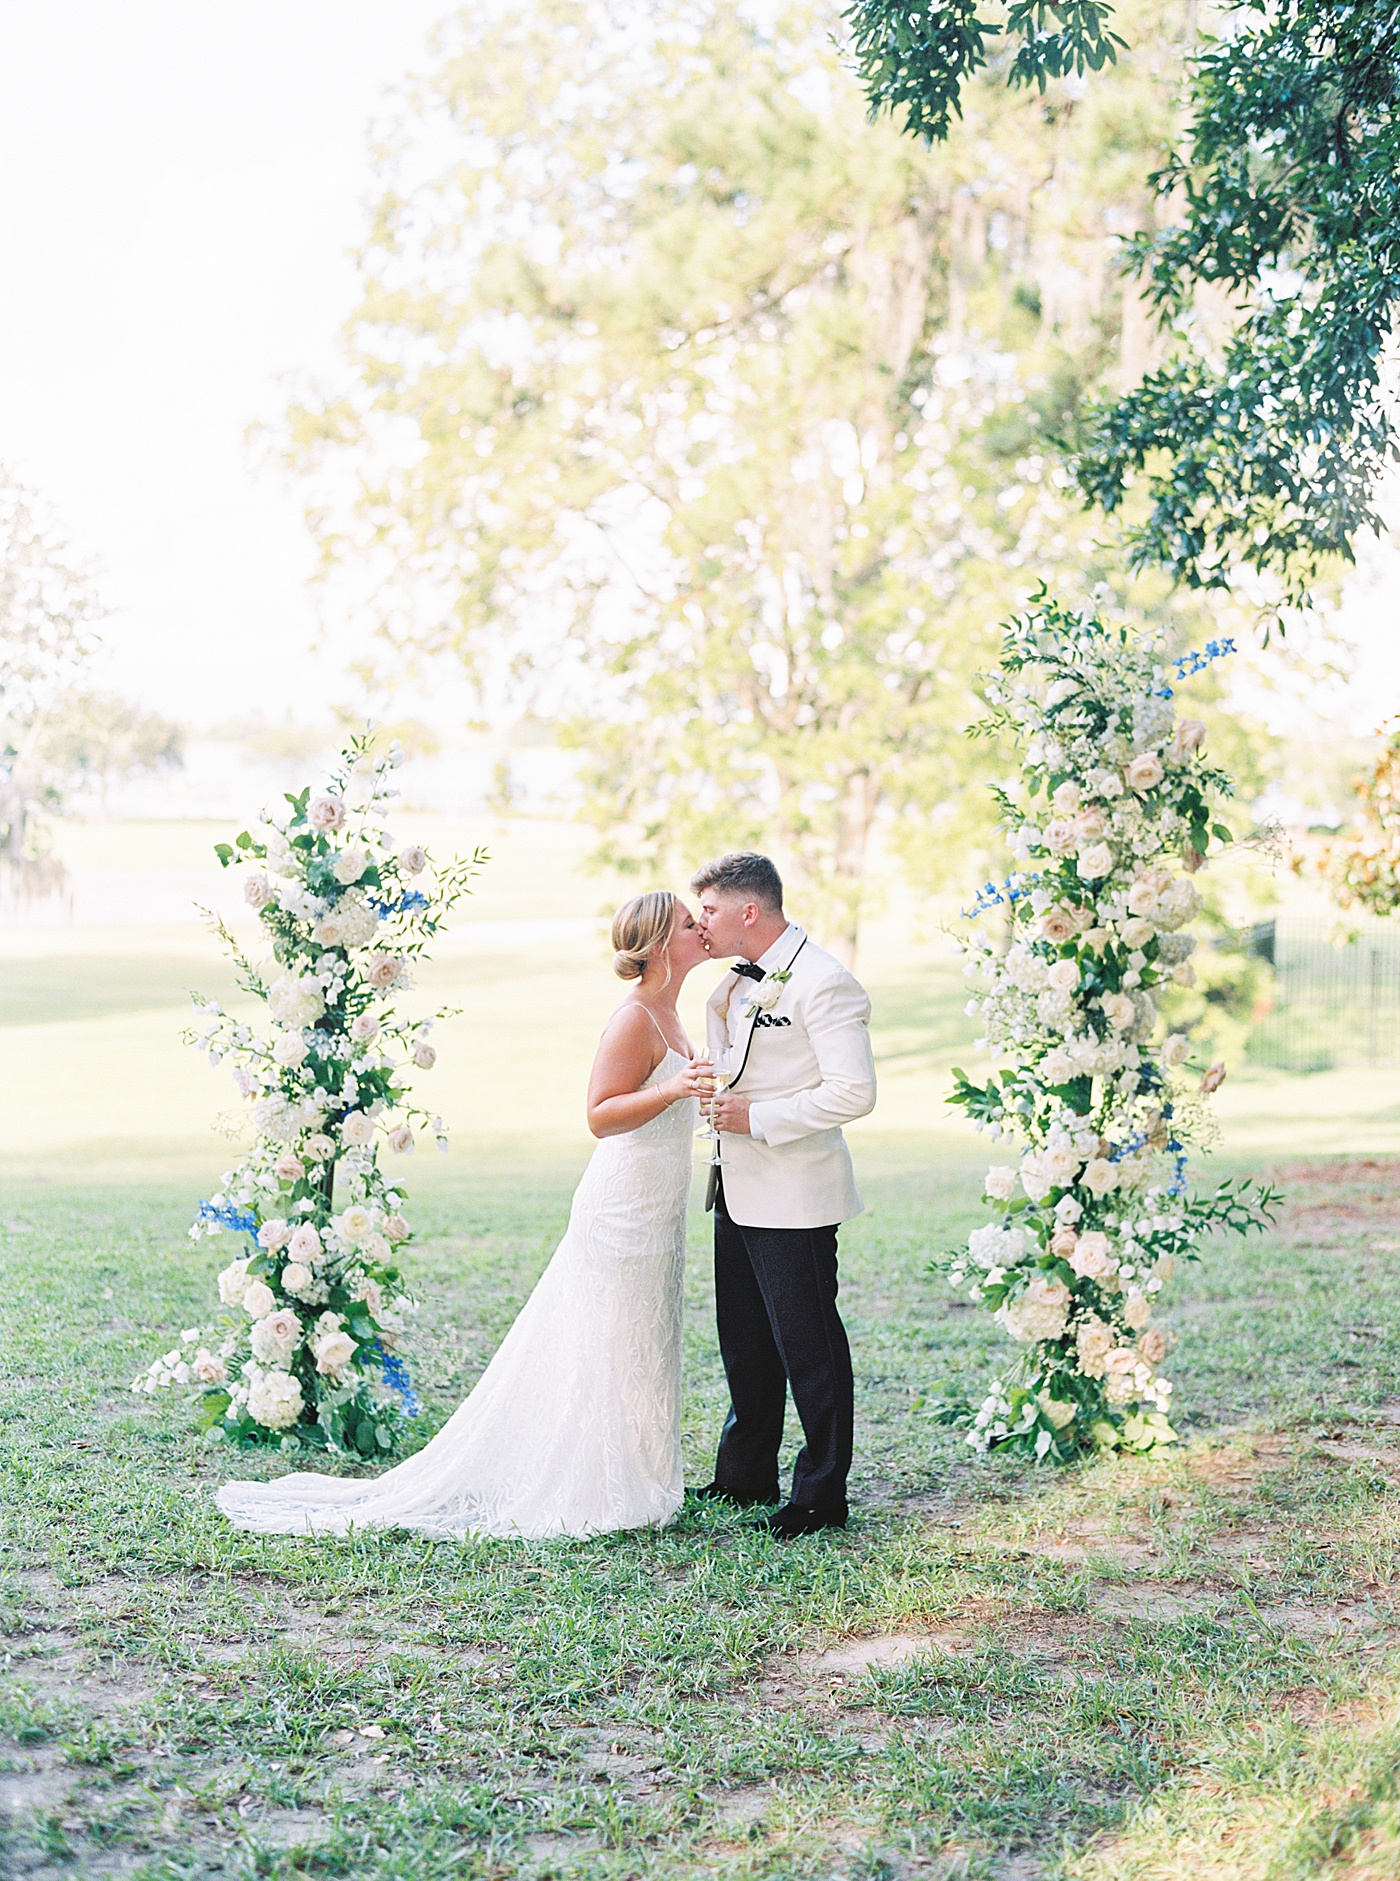 Bride and groom kissing under floral arrangement | Image by Annie Laura Photo